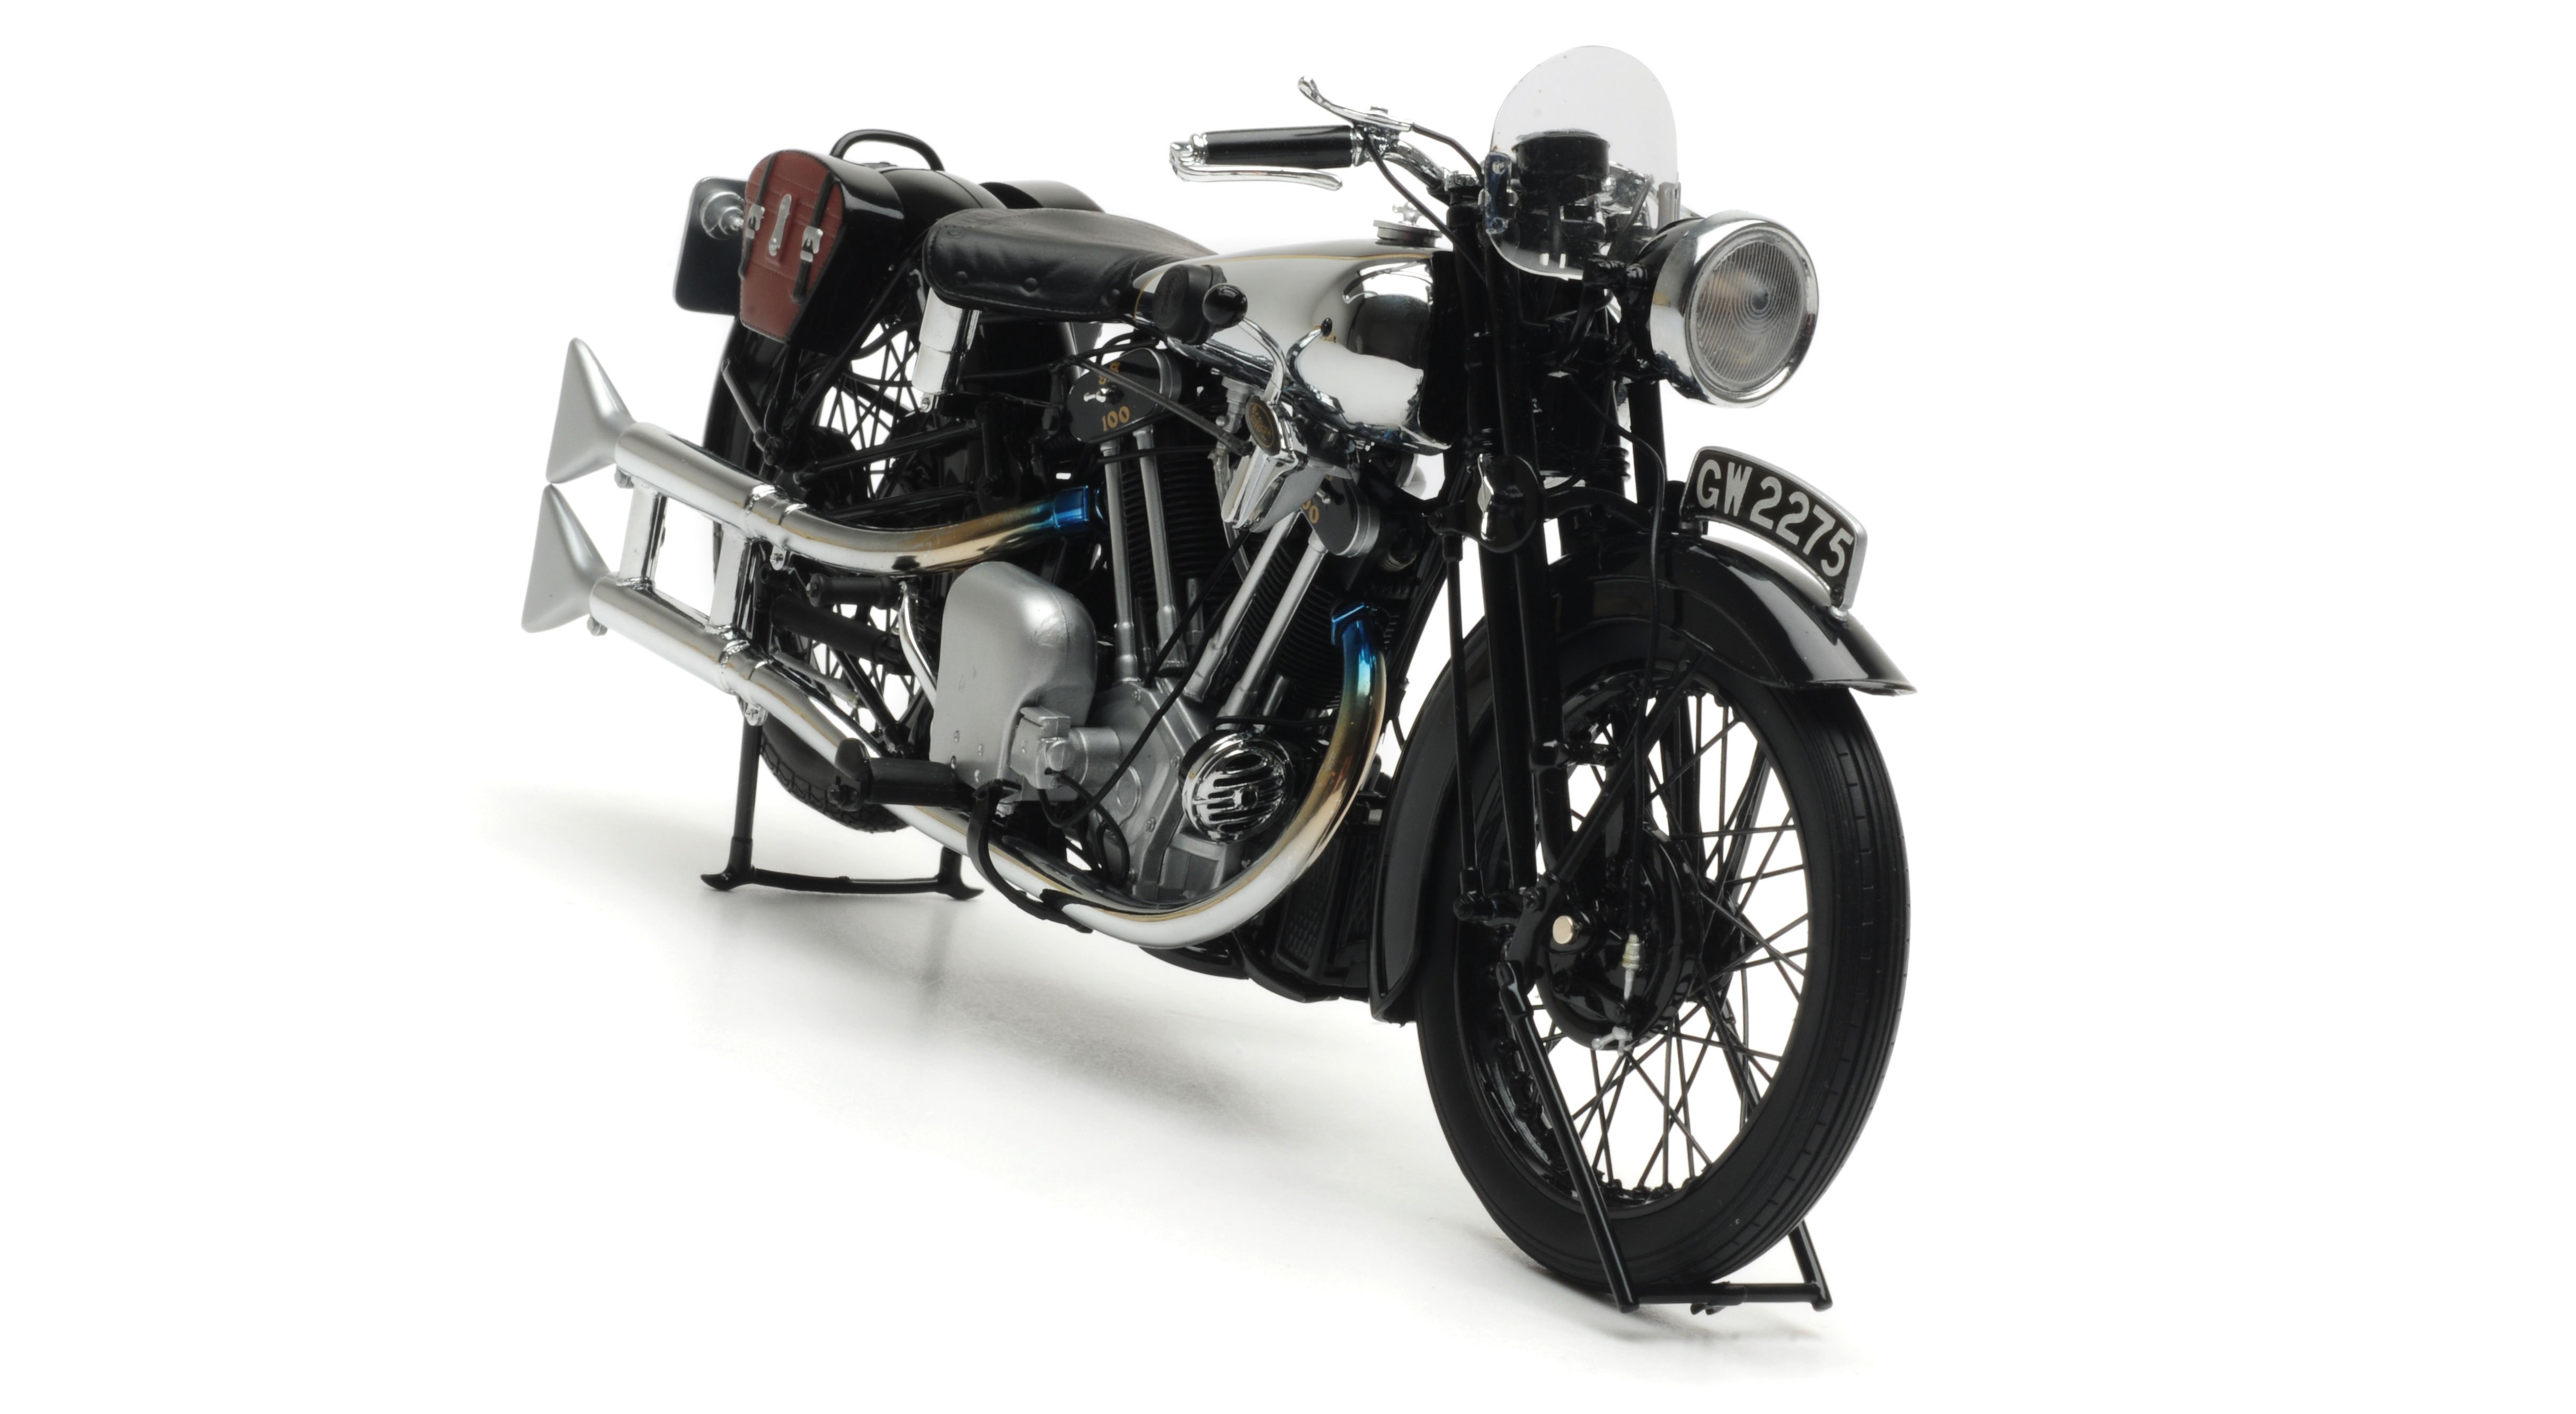 Minichamps 1:12 Lawrence Brough Superior SS100 Diecast Model Bike Review